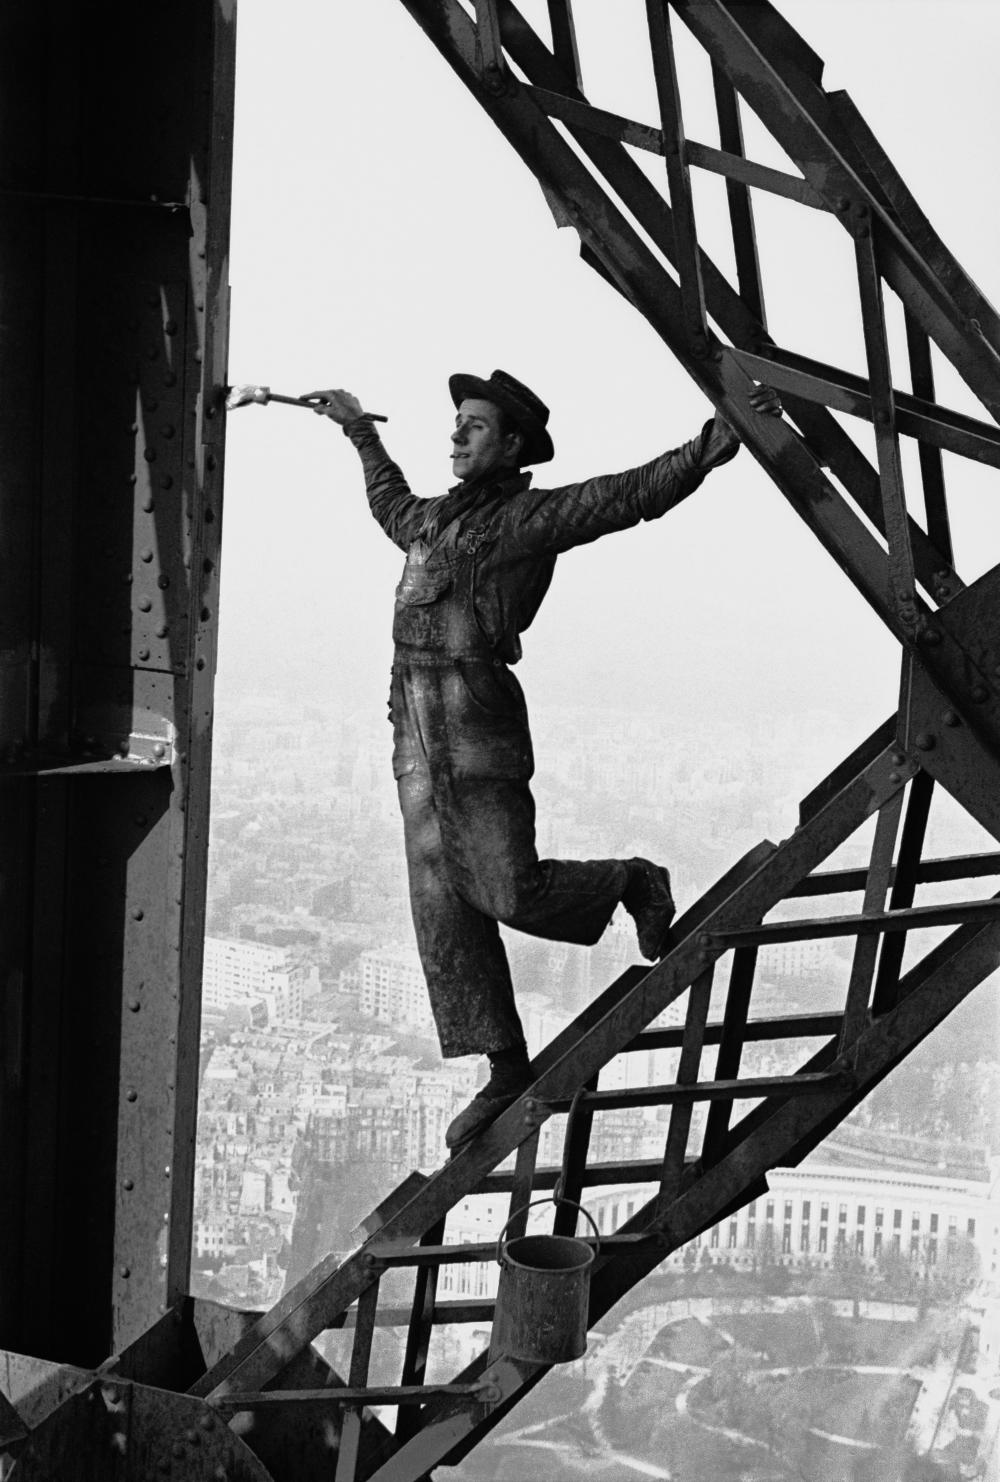 The iconic picture above "Zazou the Eiffel tower's painter" was taken by French photographer Marc Riboud in Paris in 1953